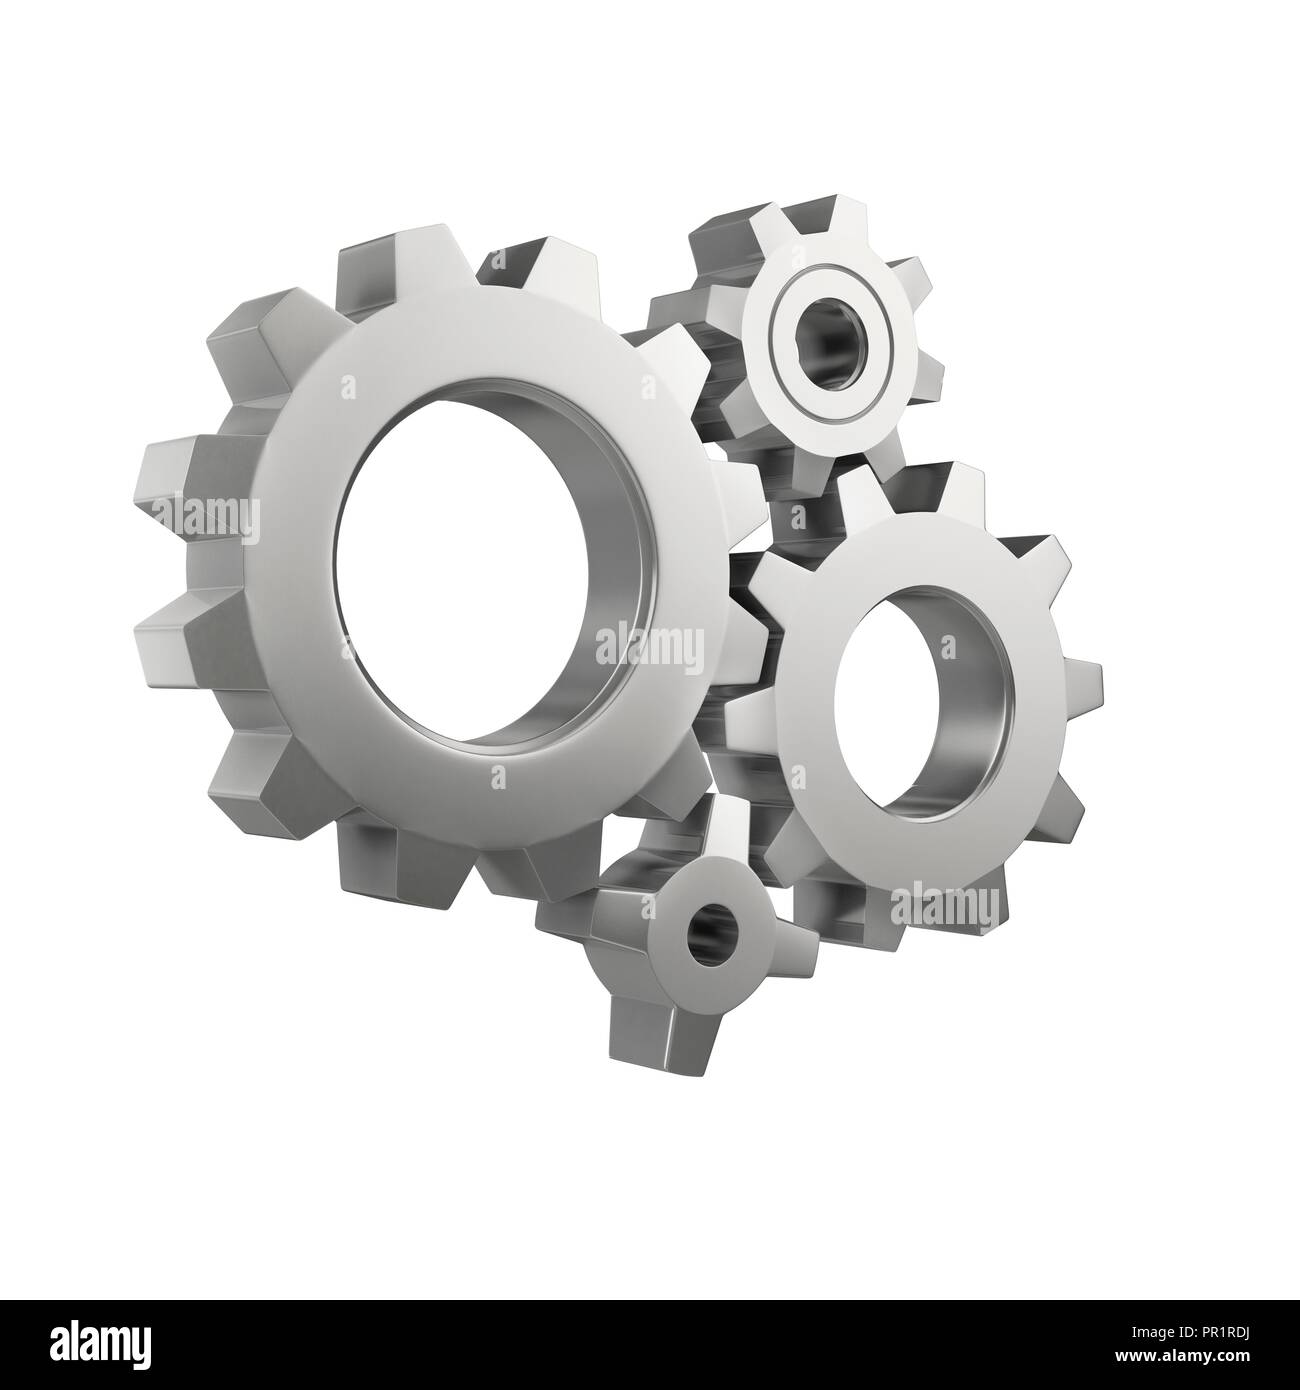 Simple mechanical system with gear wheels, illustration. Stock Photo